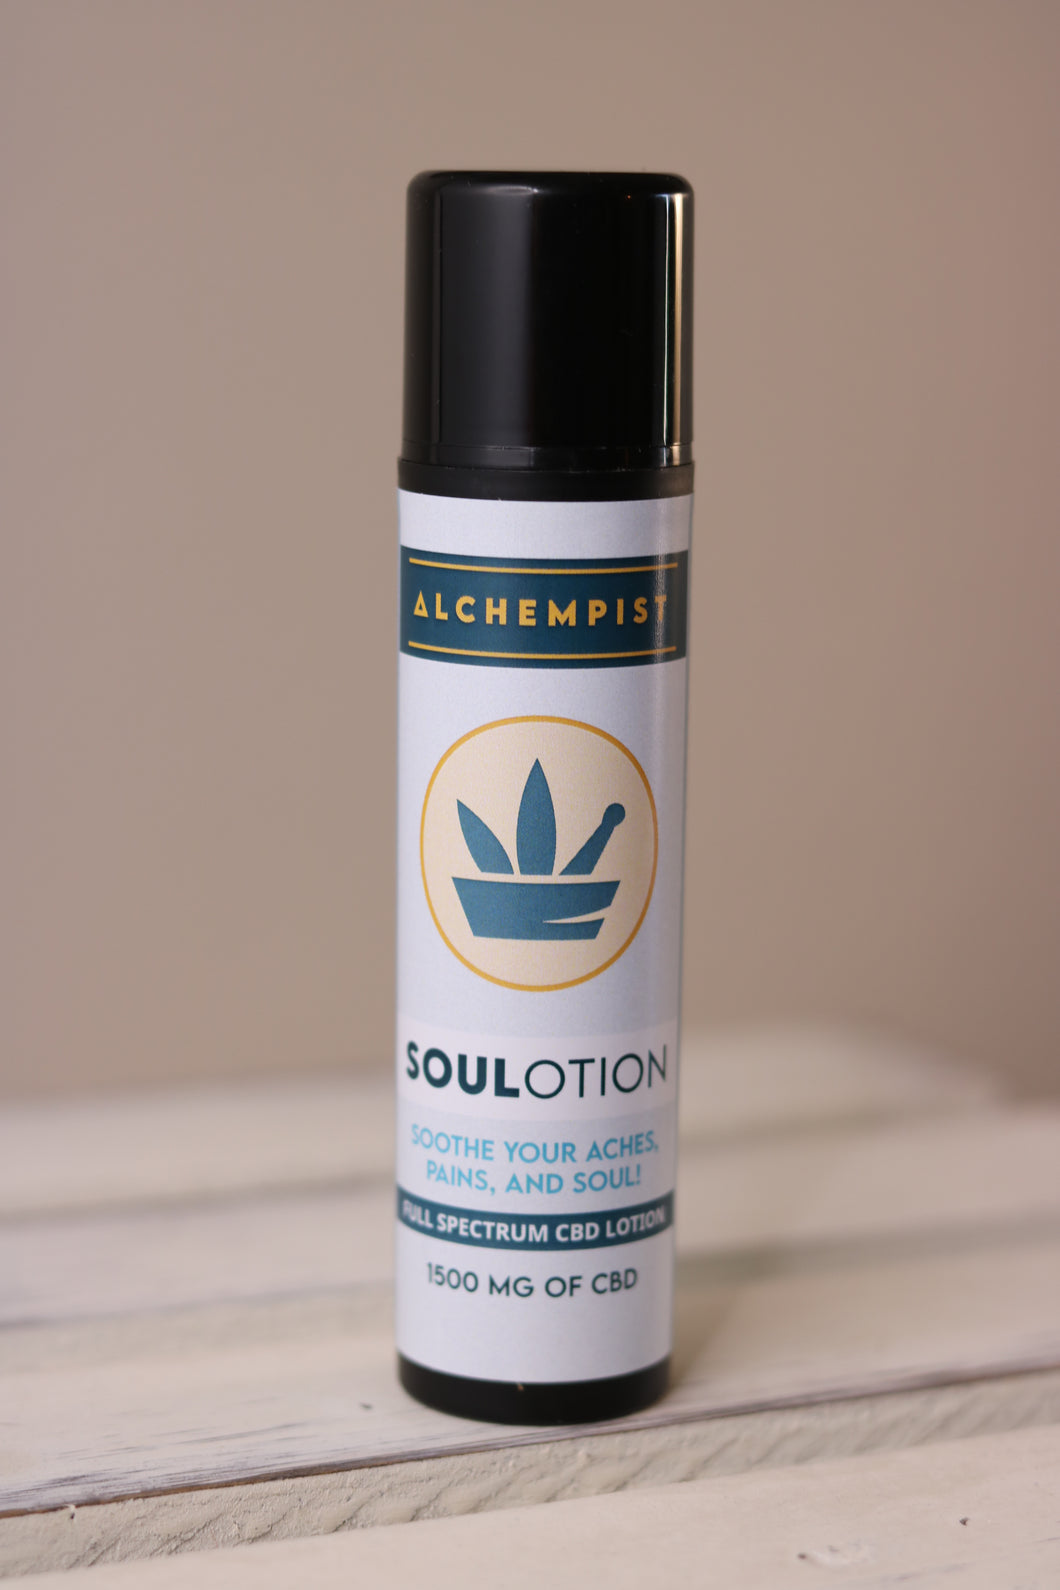 The Alchempist SOULotion - Hemp Topical Cream and Lotion